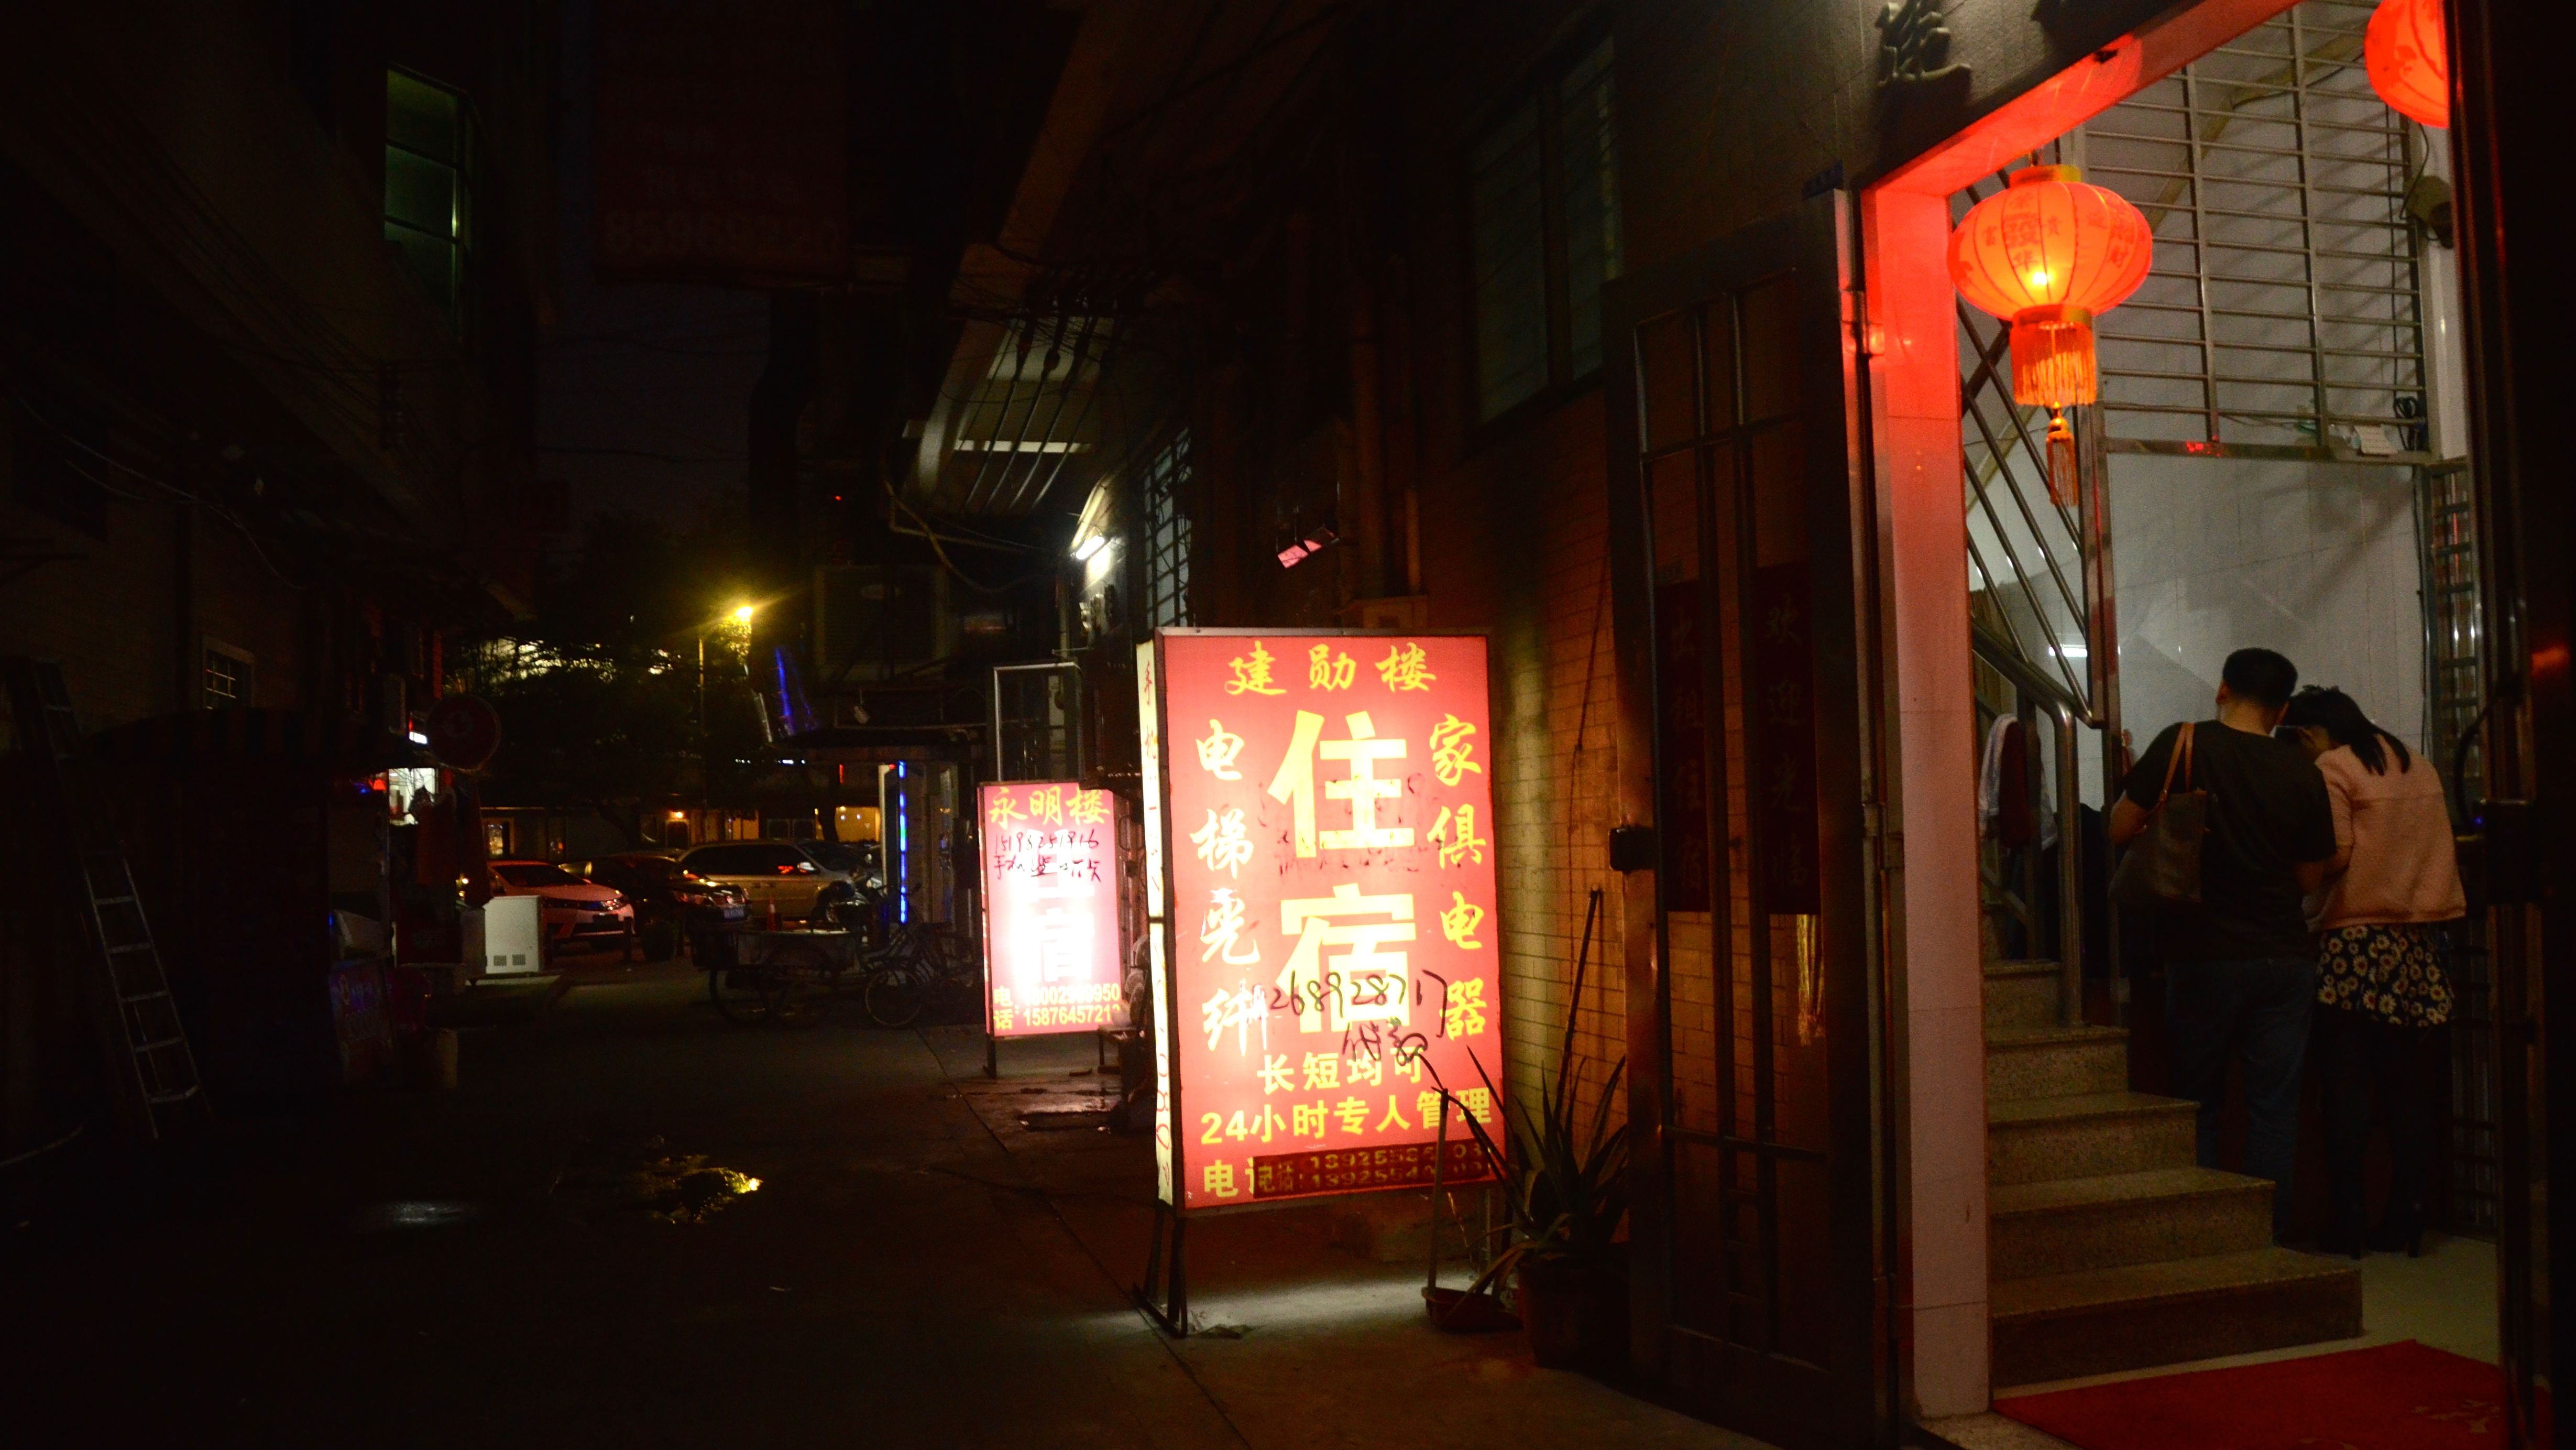 A hotel in a red light district of Dongguan, southern China